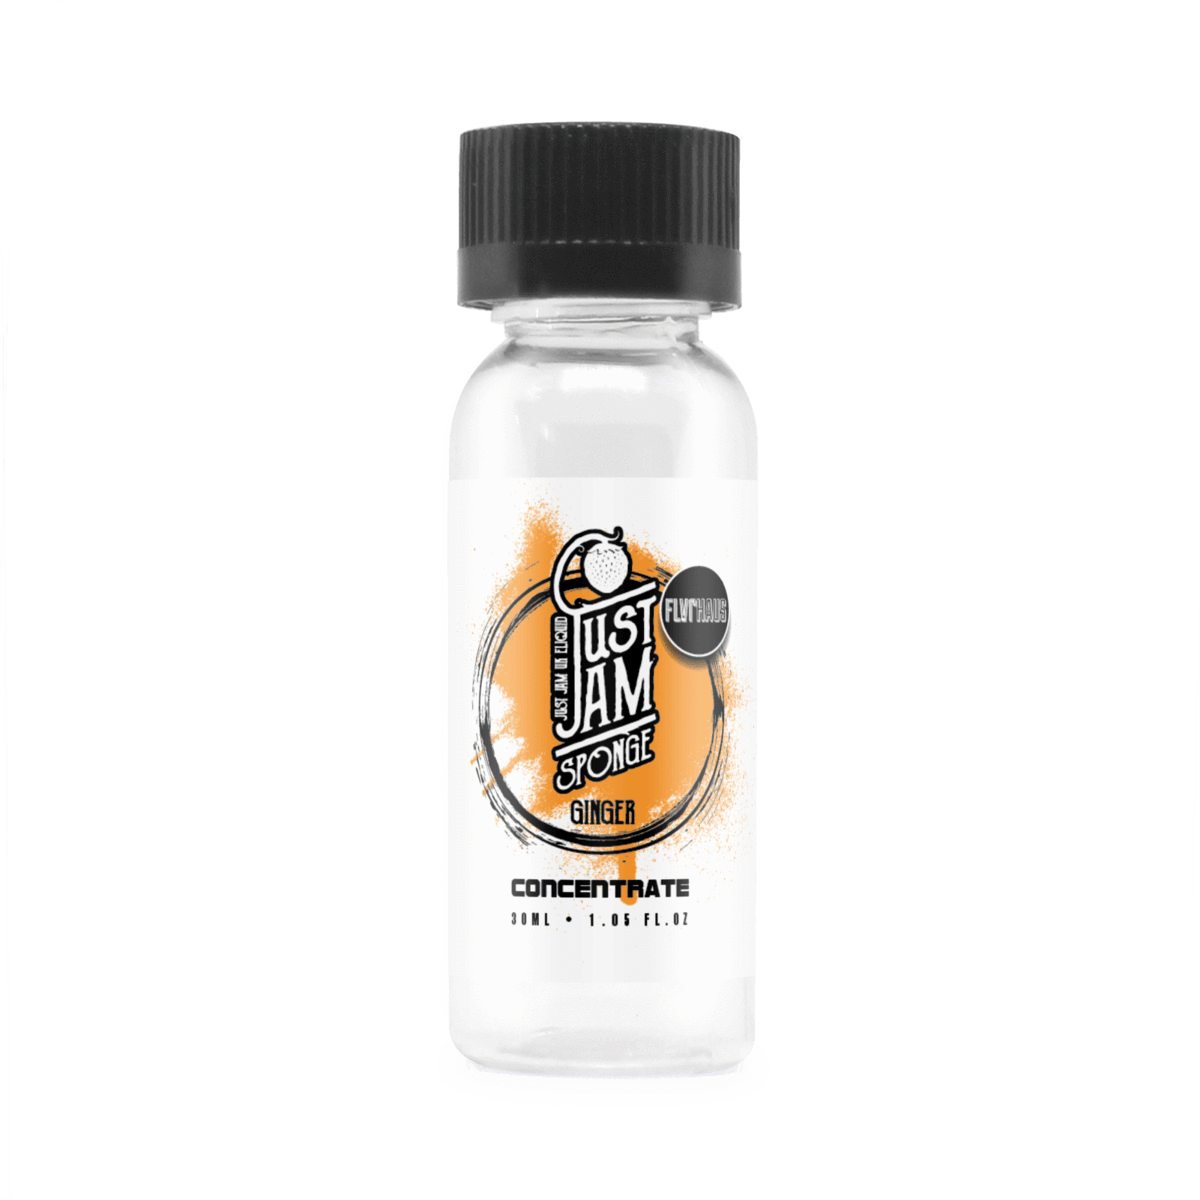 Ginger Sponge Concentrate E-liquid by Just Jam 30ml